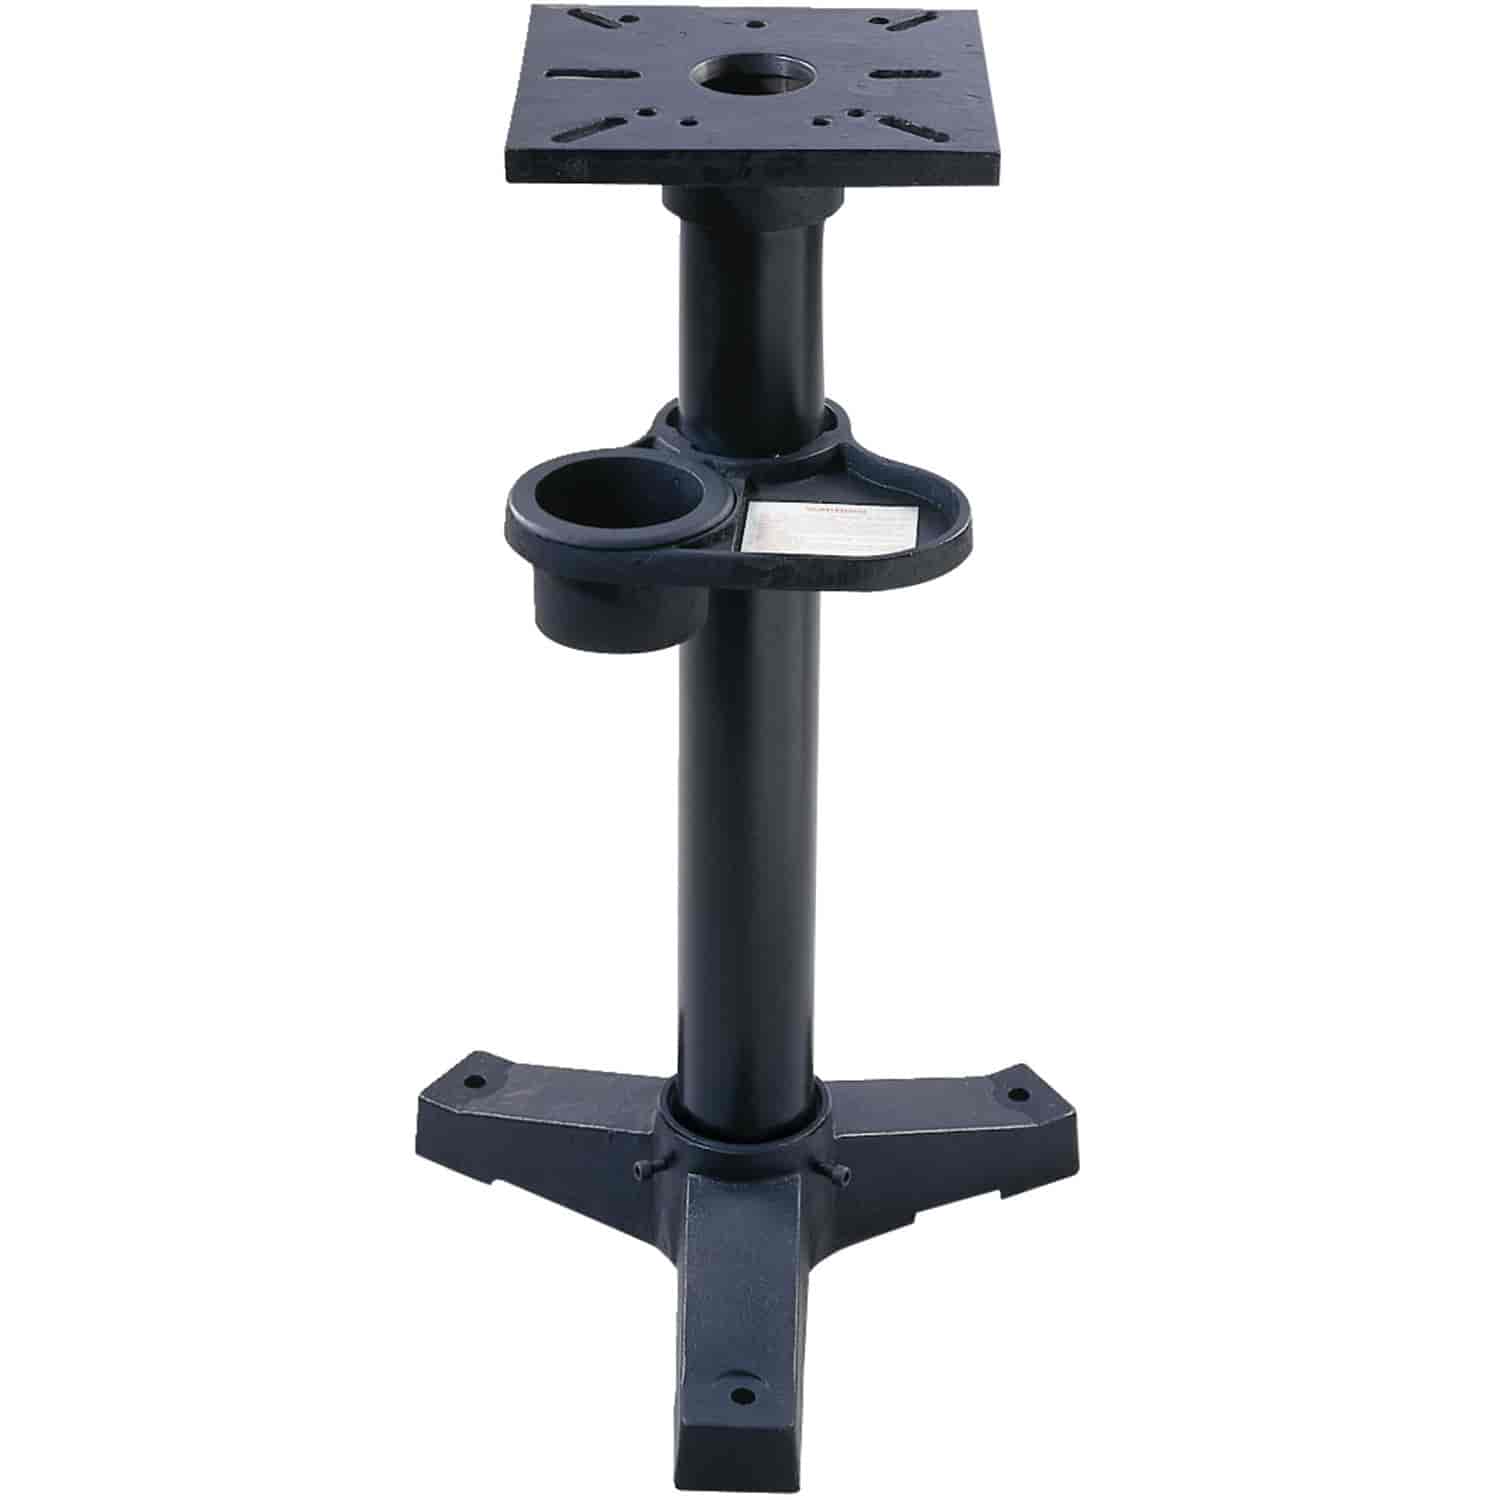 Pedestal Stand for Bench Grinders Overall Dimensions (LxWxH):